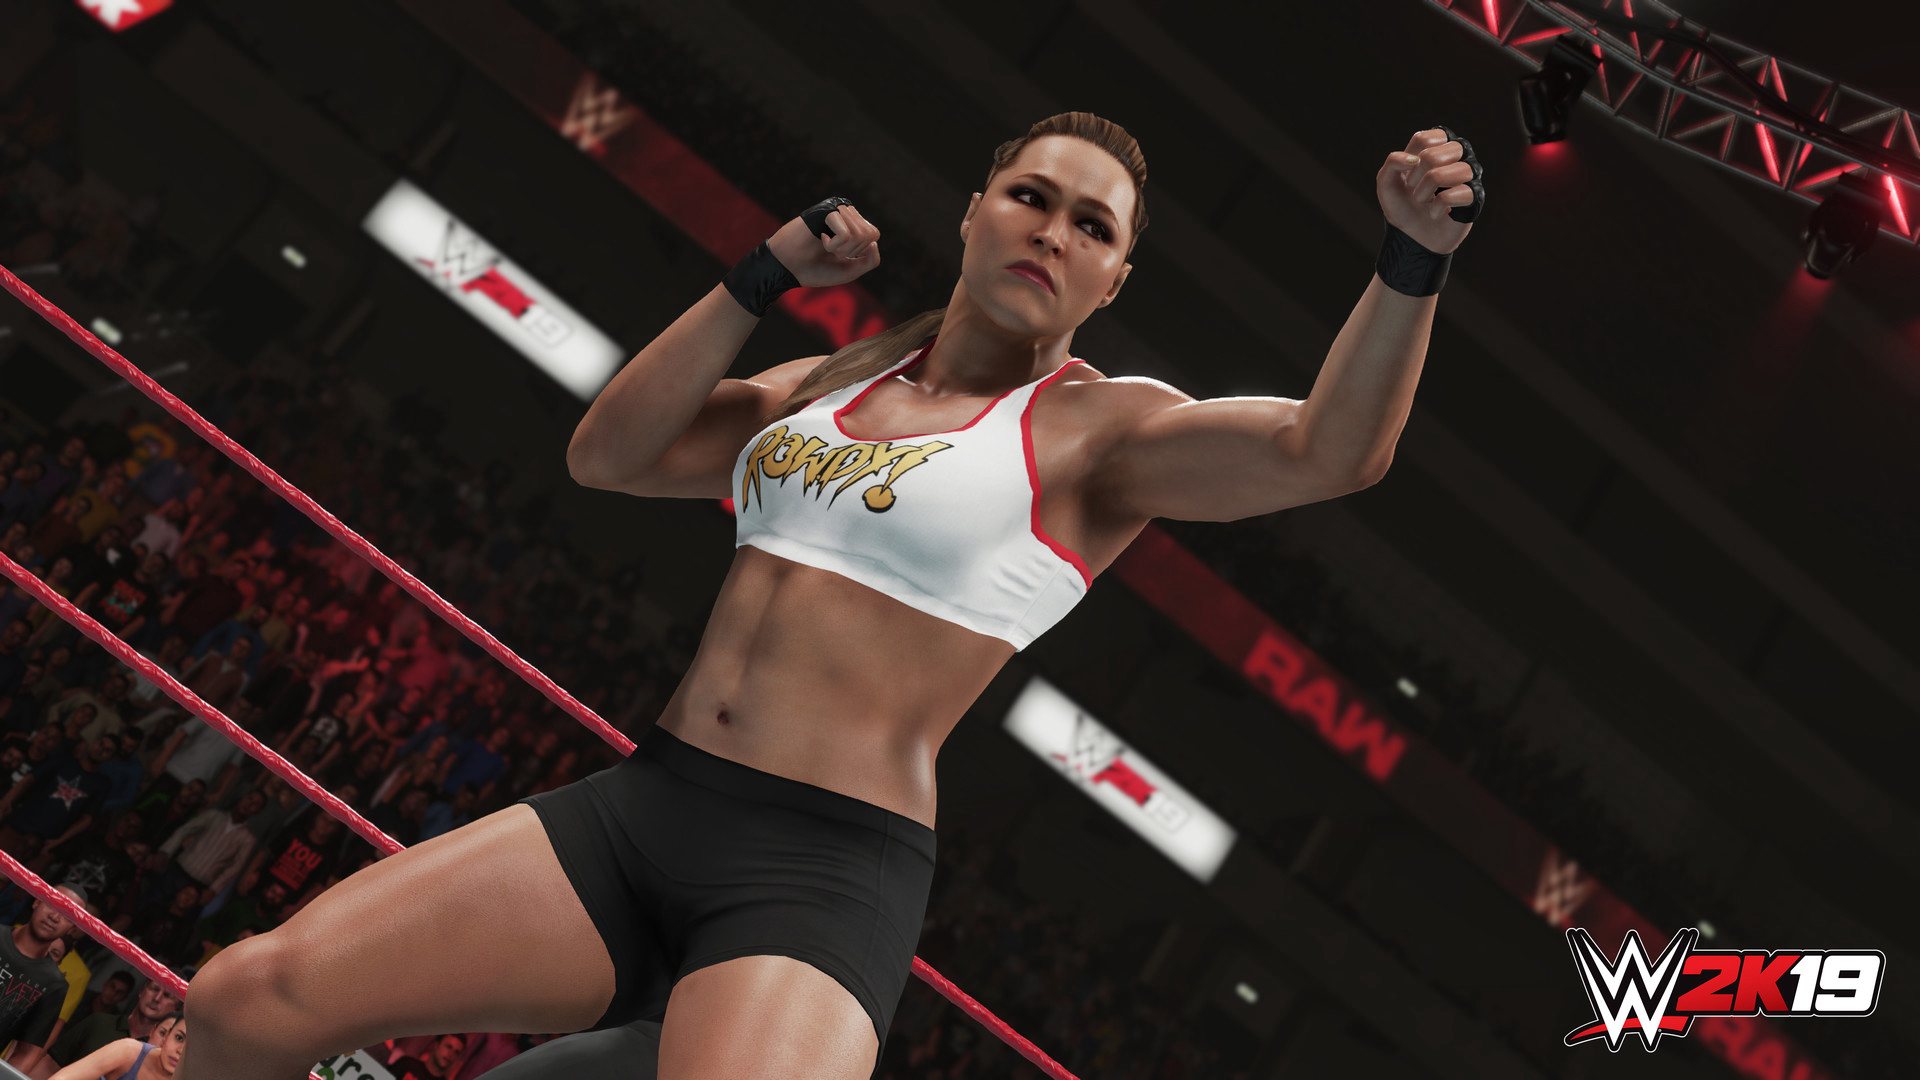 WWE 2K19 PlayStation 4 Account pixelpuffin.net Activation Link [USD 15.81]